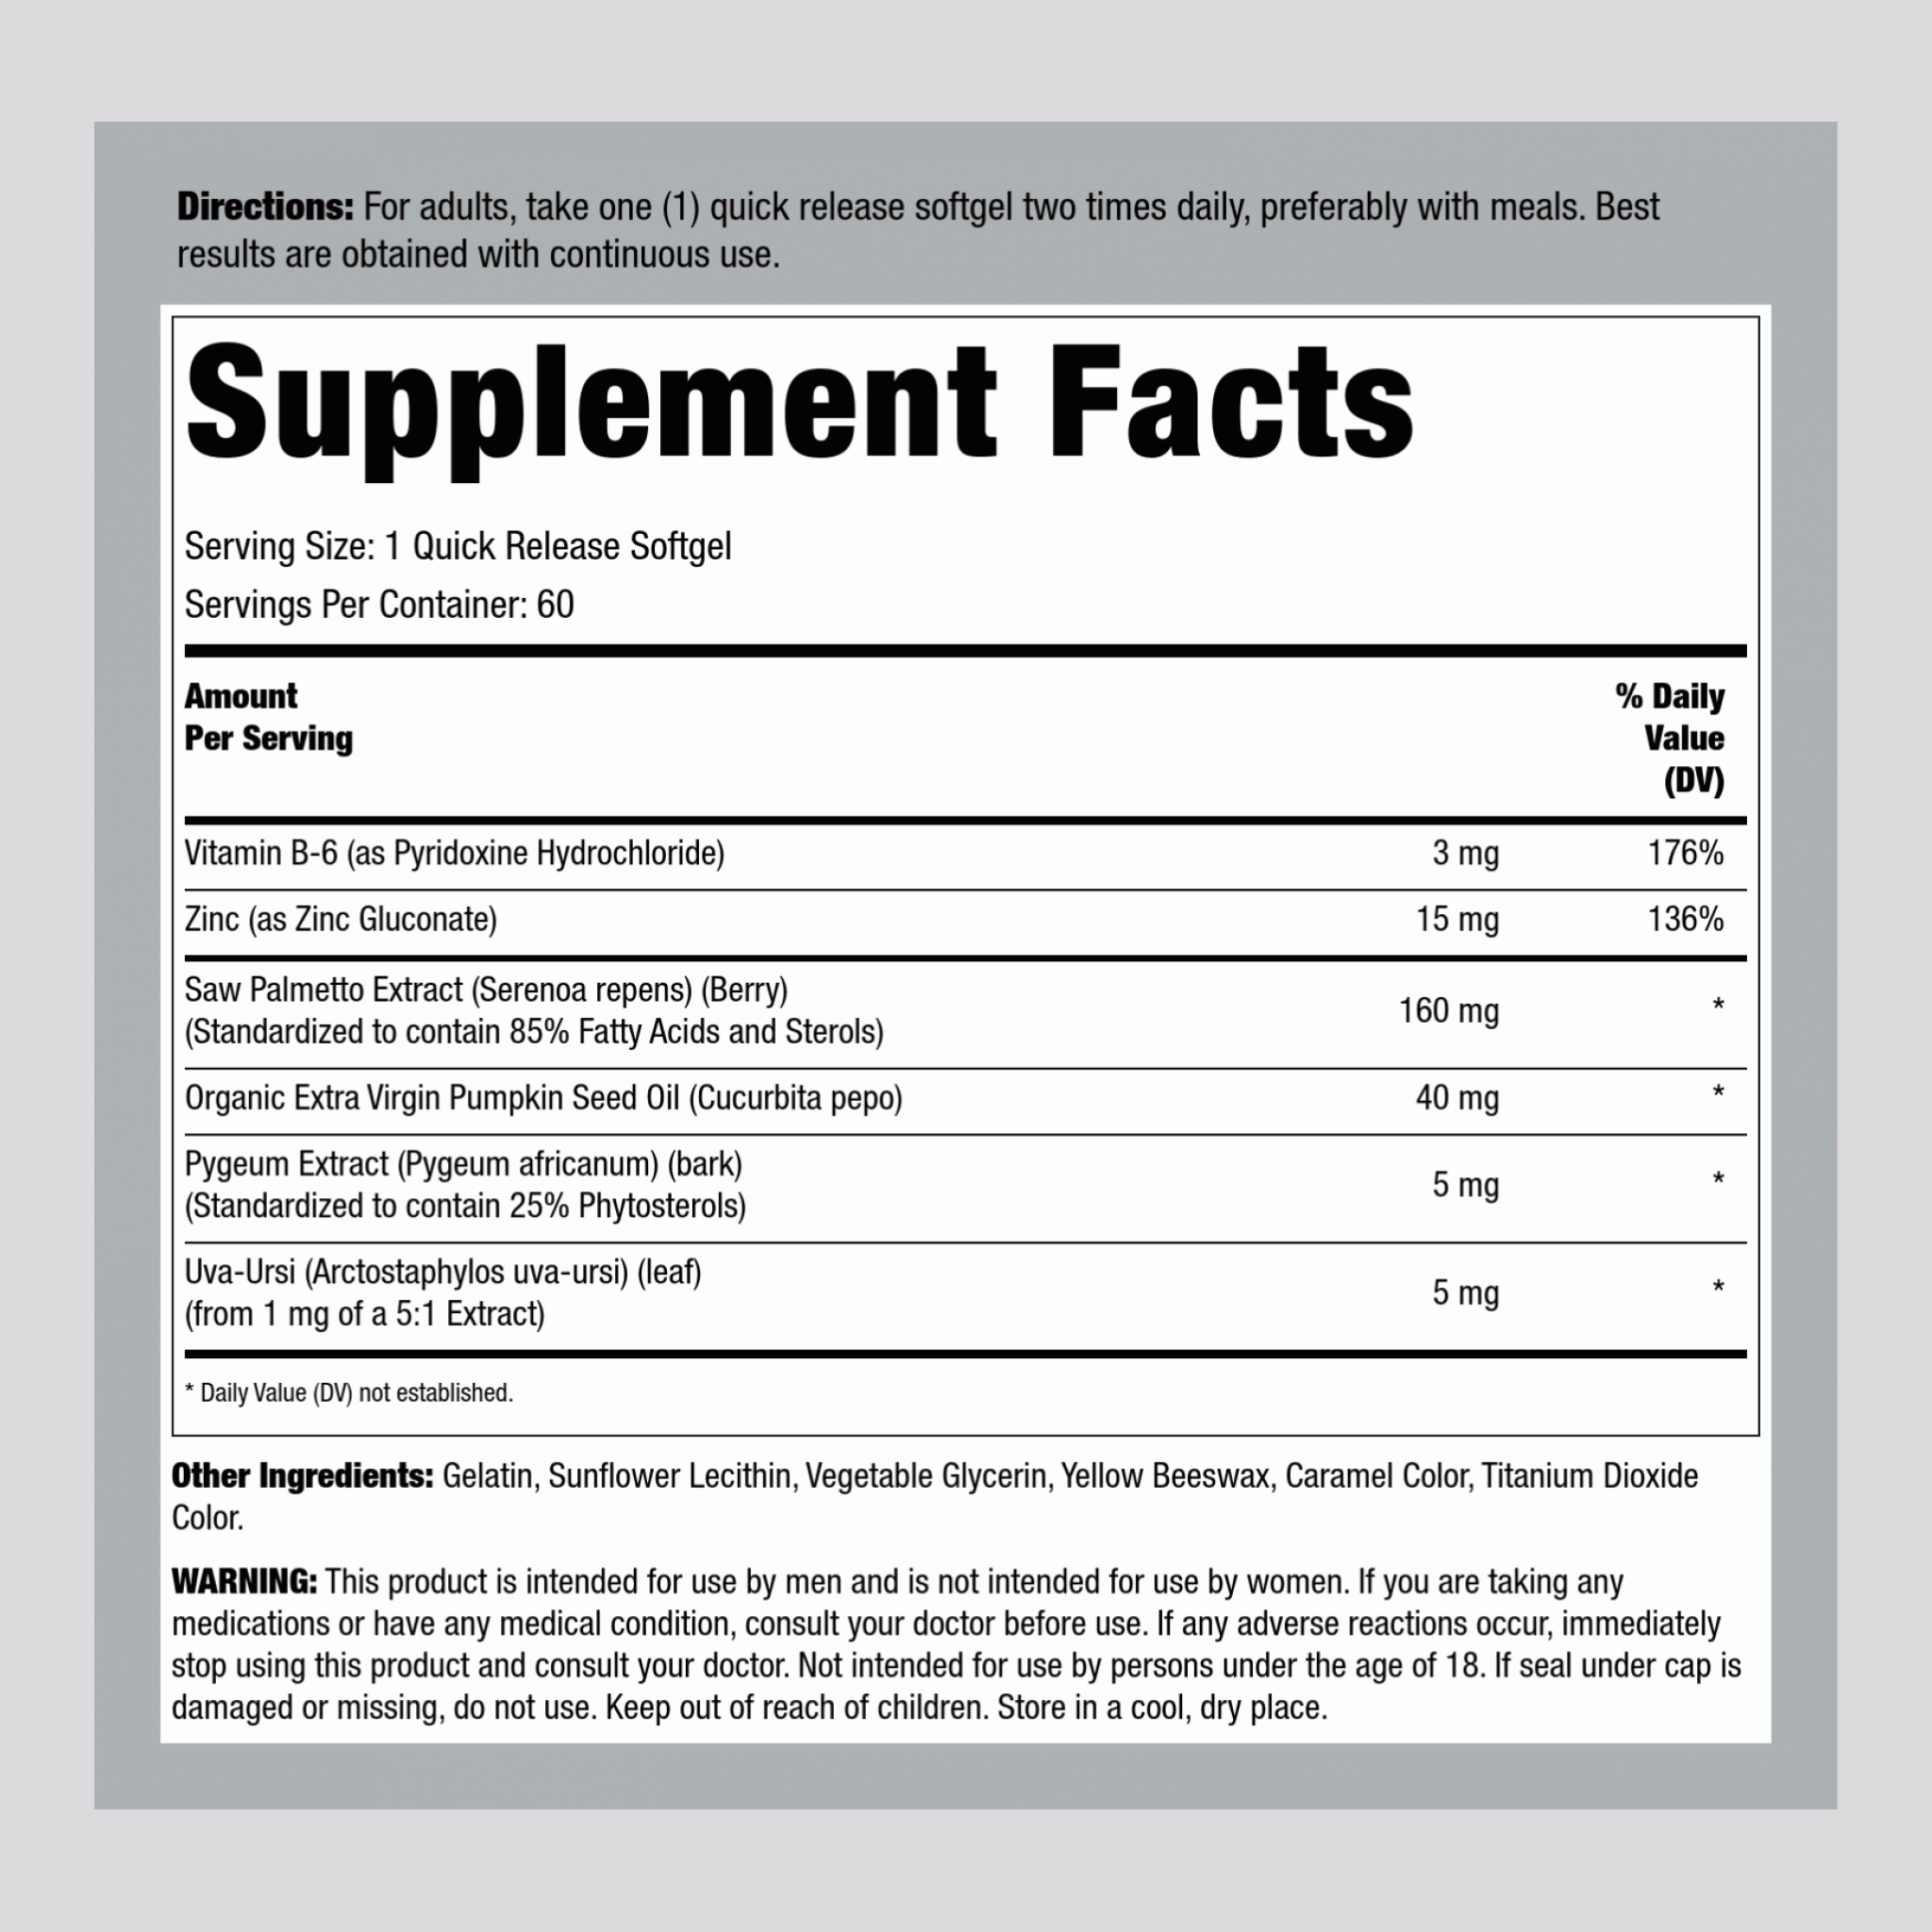 Saw Palmetto Complex Standardized Extract, 160 mg, 60 Softgels